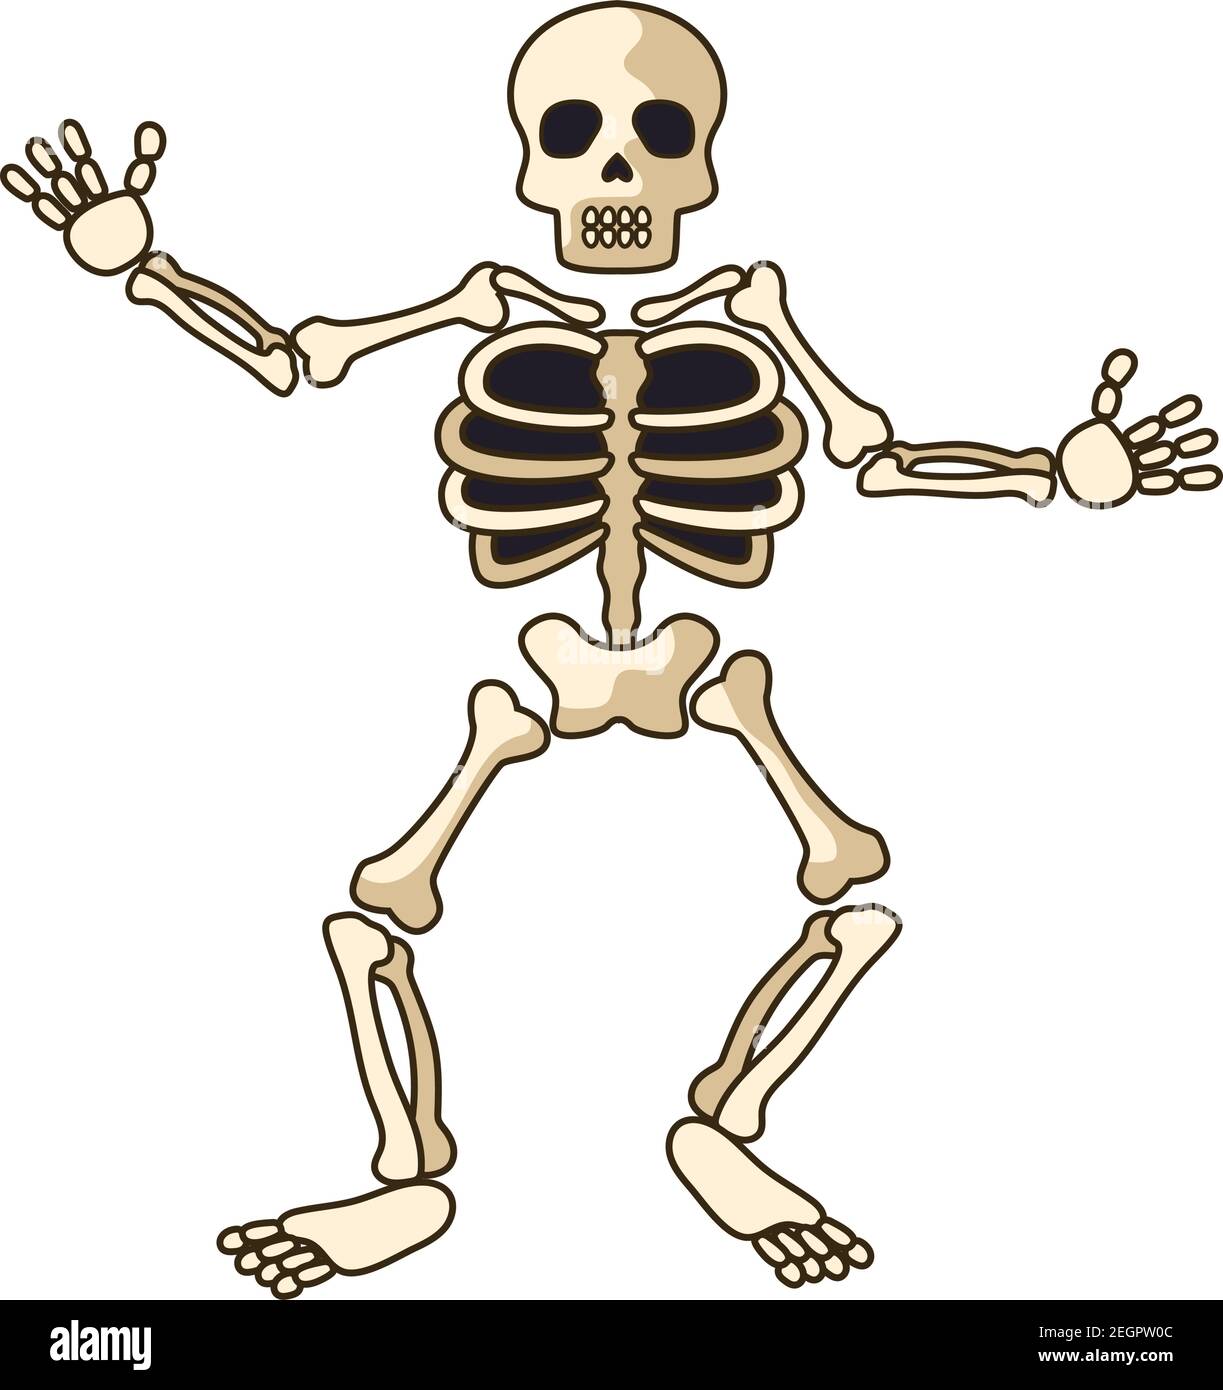 human skeleton icon isolated on white background. vector illustration Stock Vector